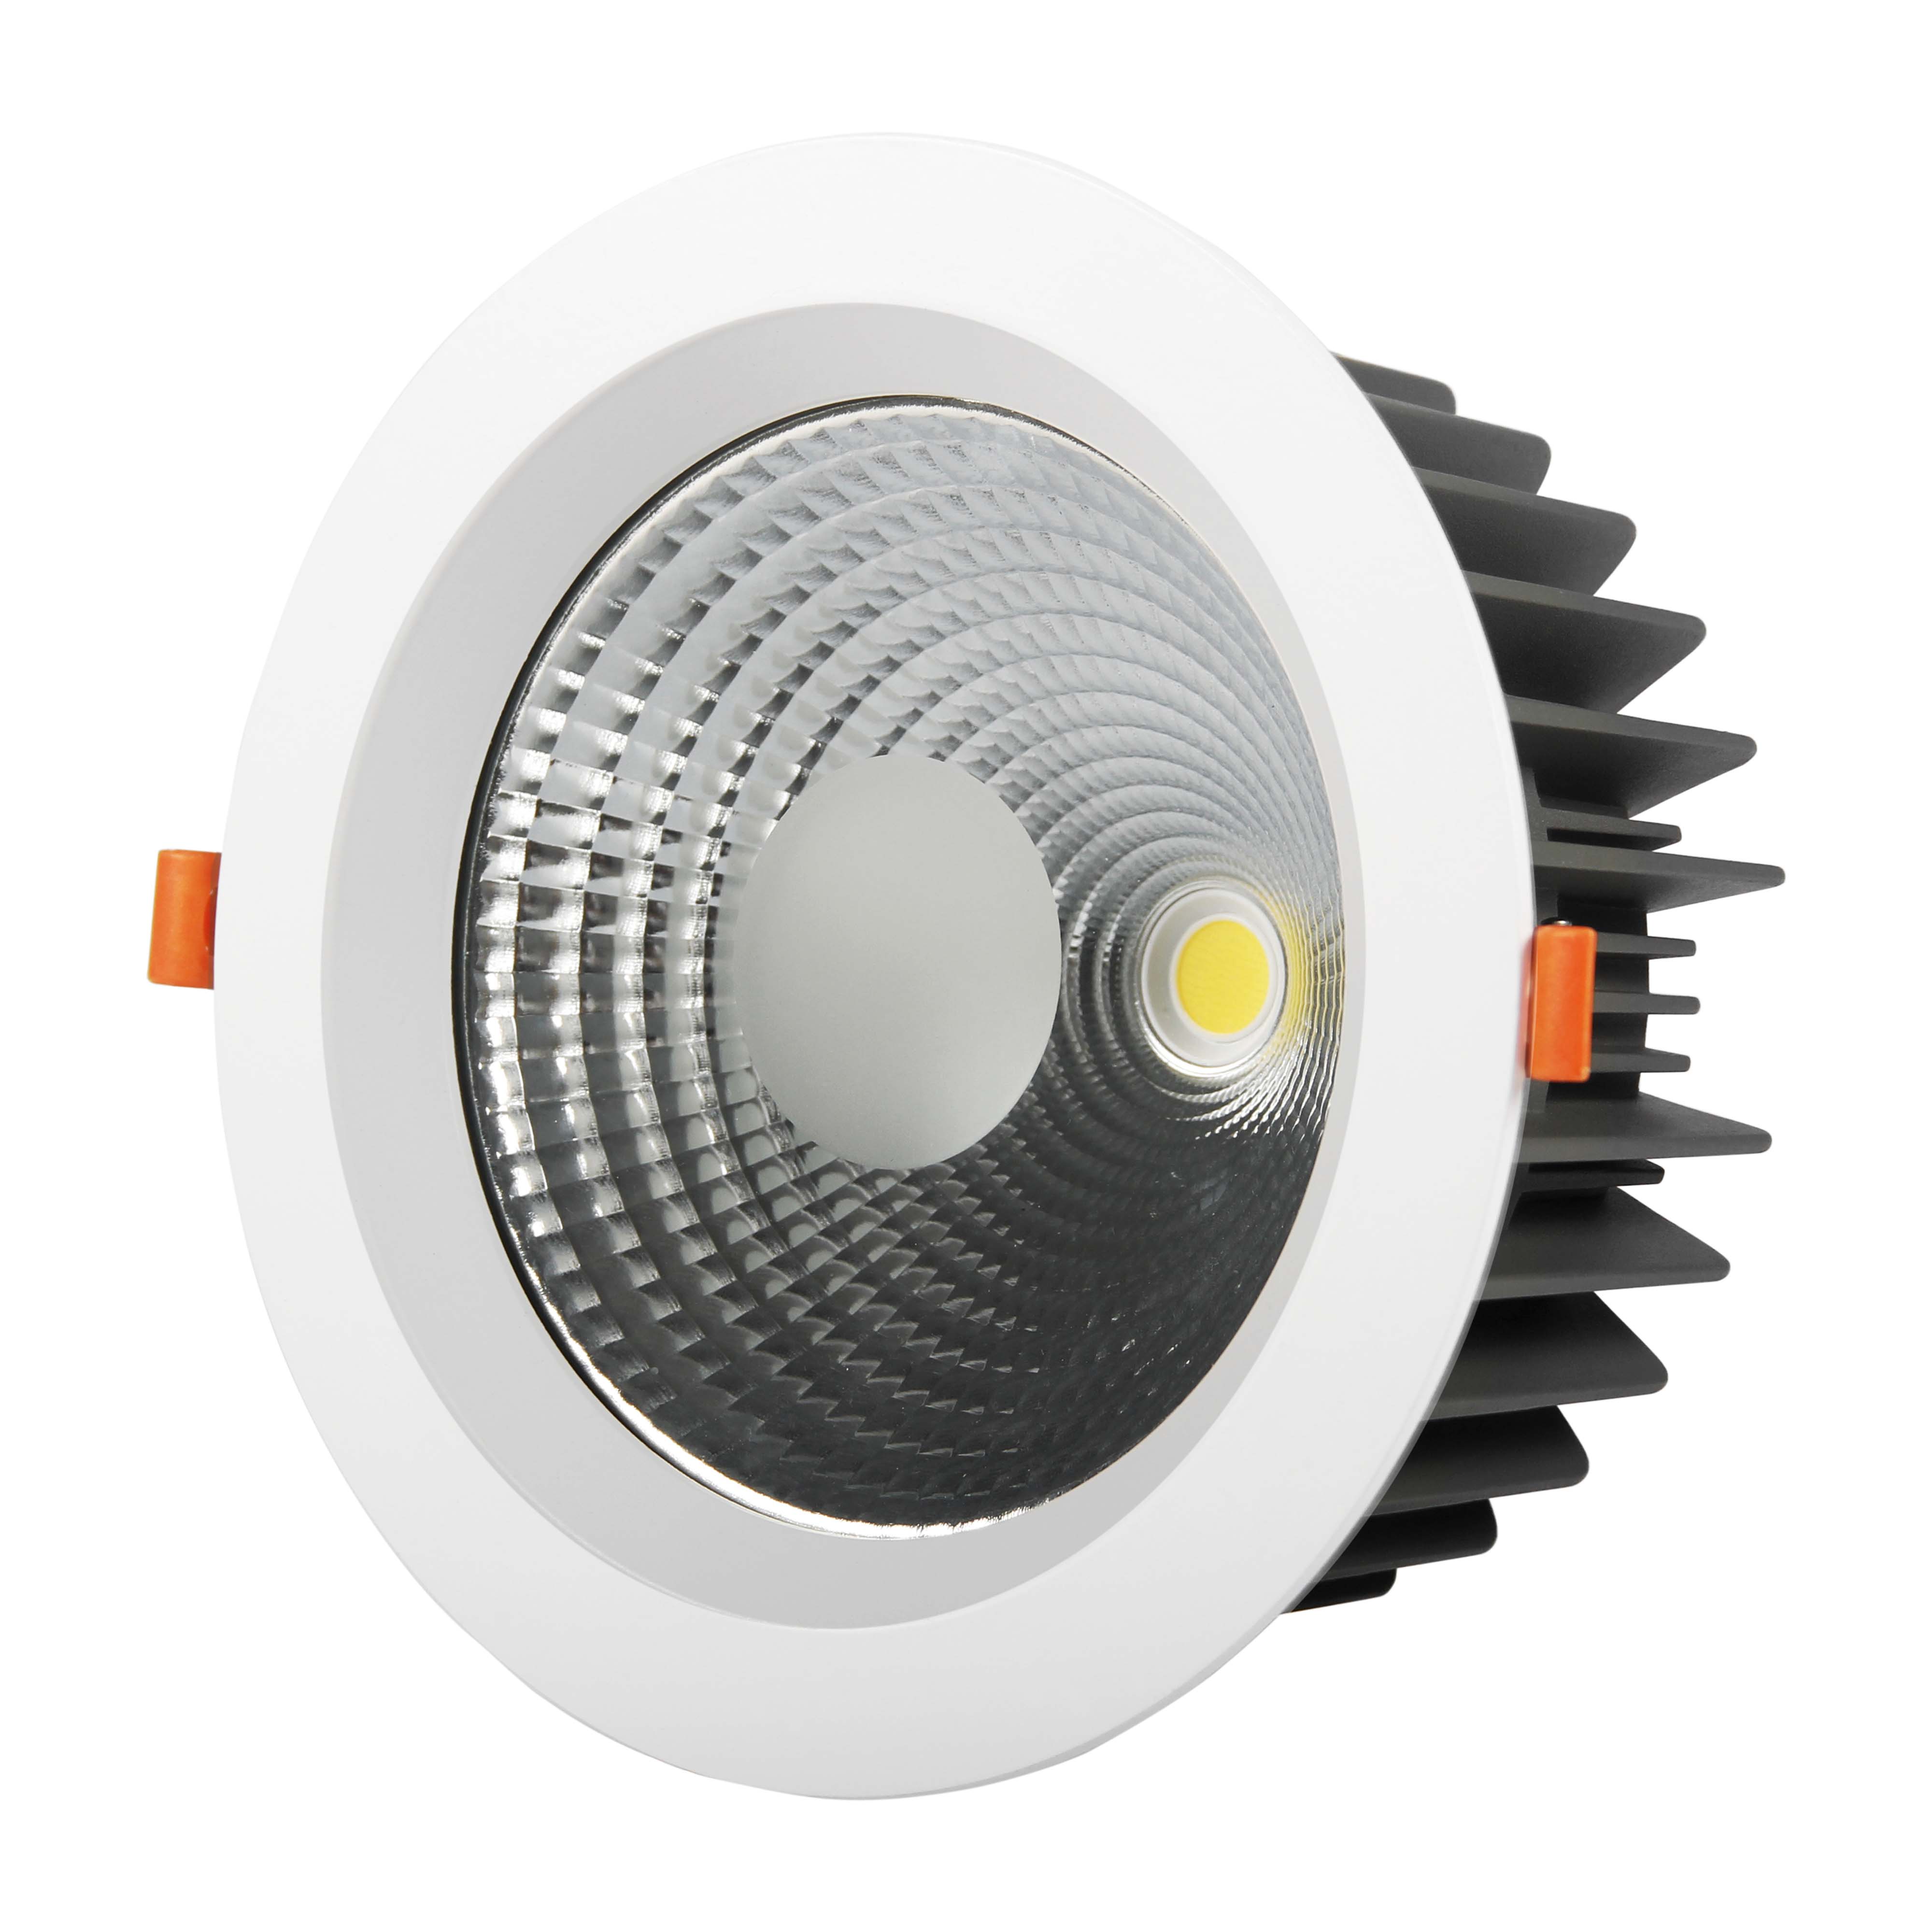 LED downlight products